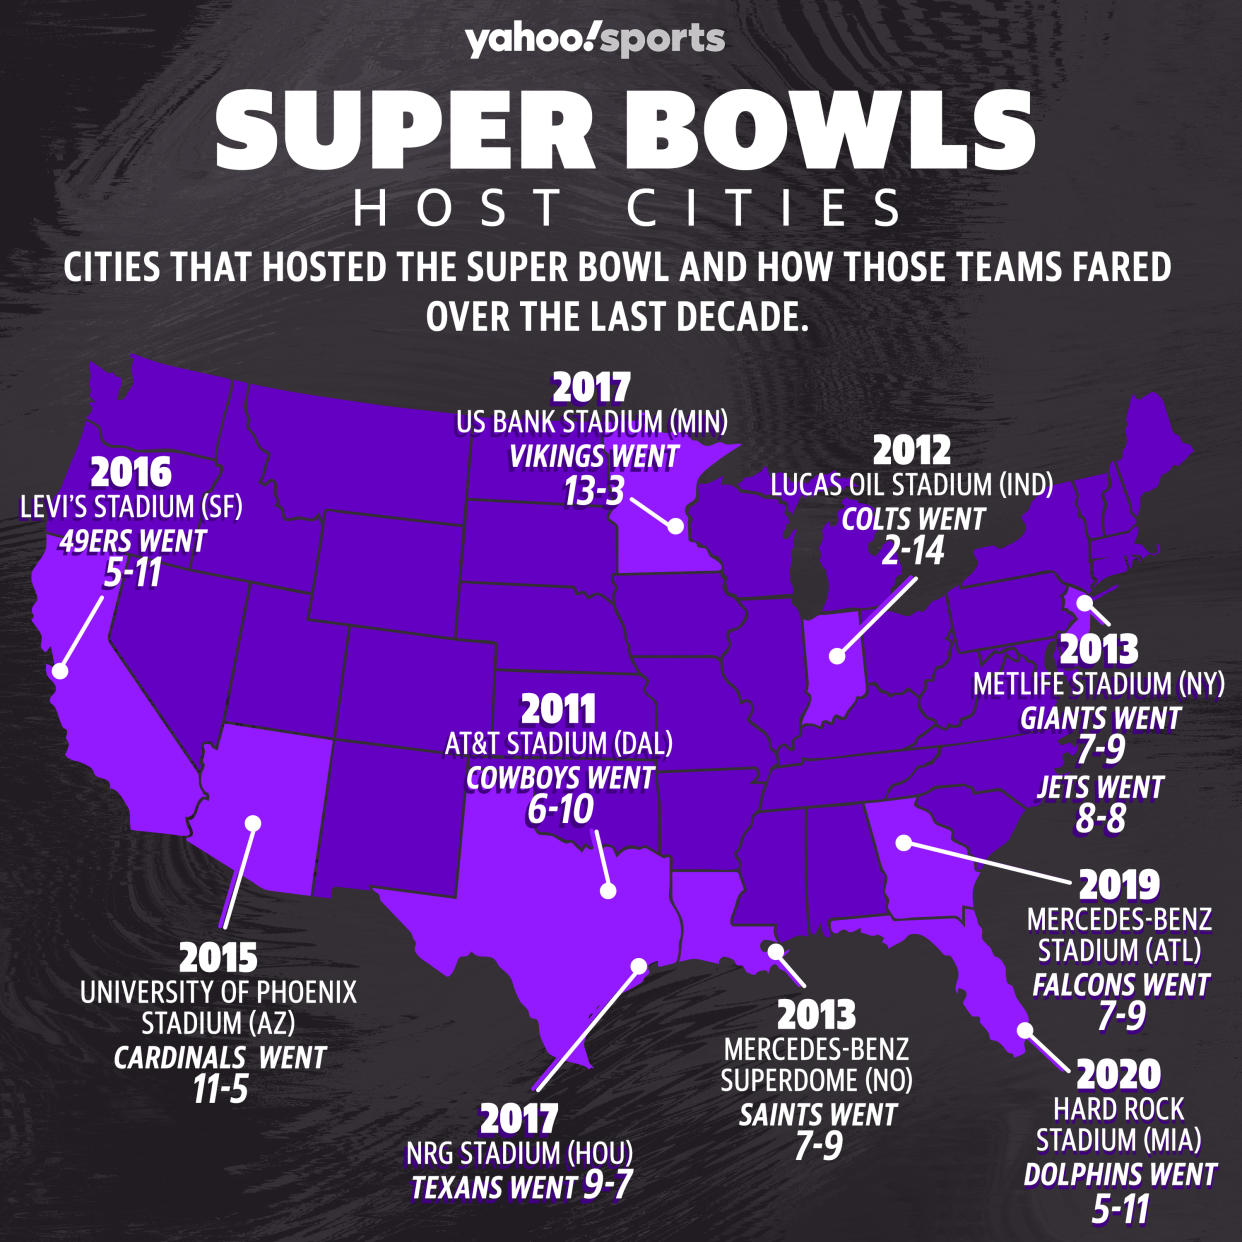 The last decade of host teams trying to play in the Super Bowl has not been kind. 